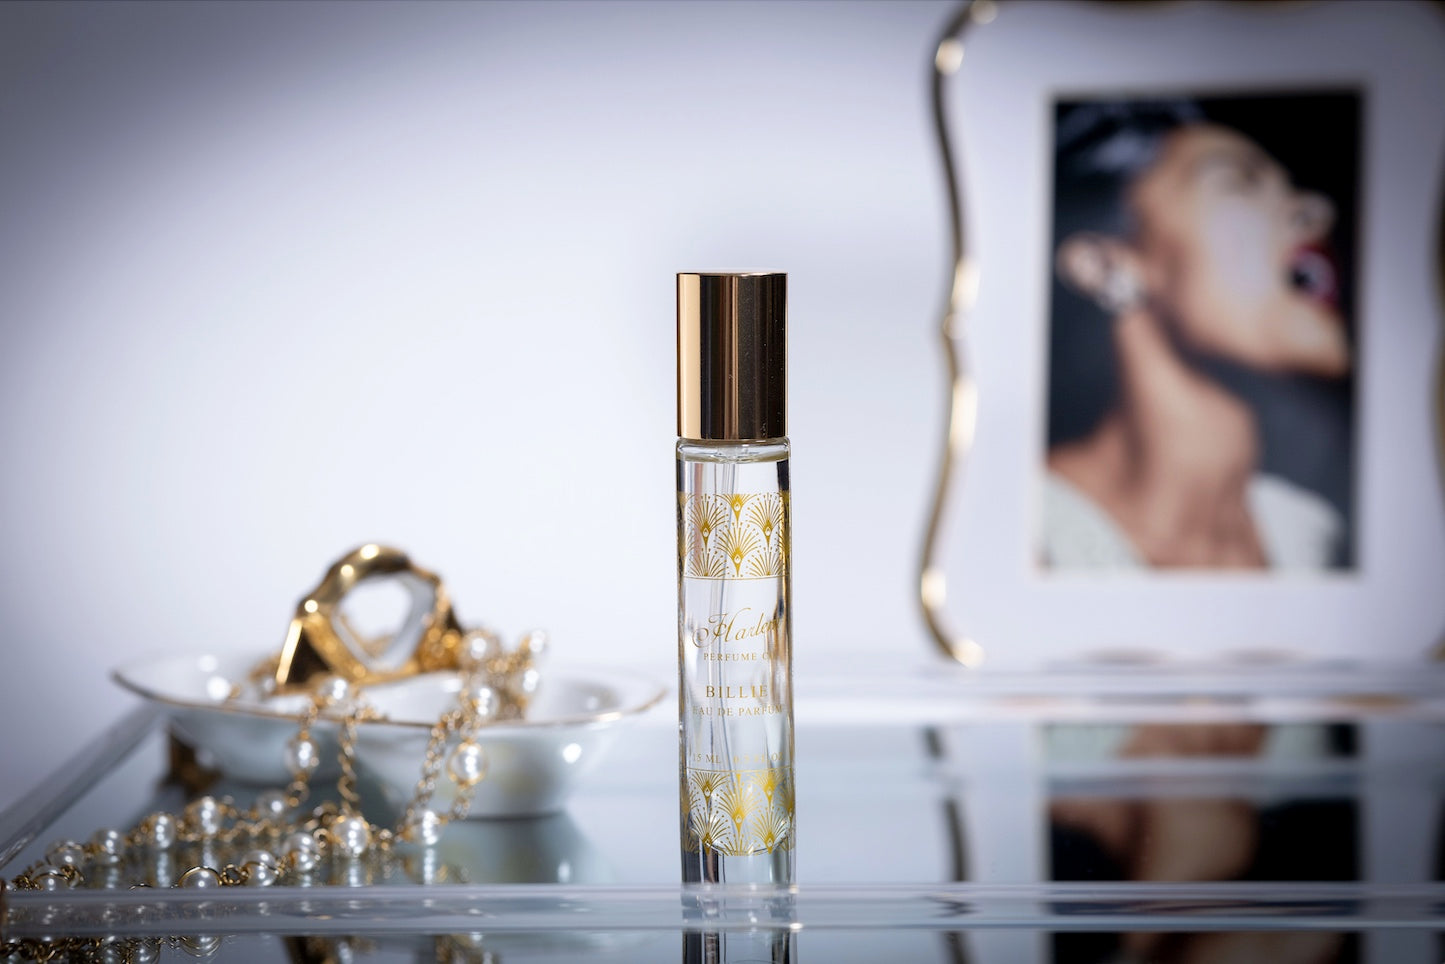 This is a lifestyle image of our Billie 15 ml perfume bottle with an image of Billie Holiday in the background.